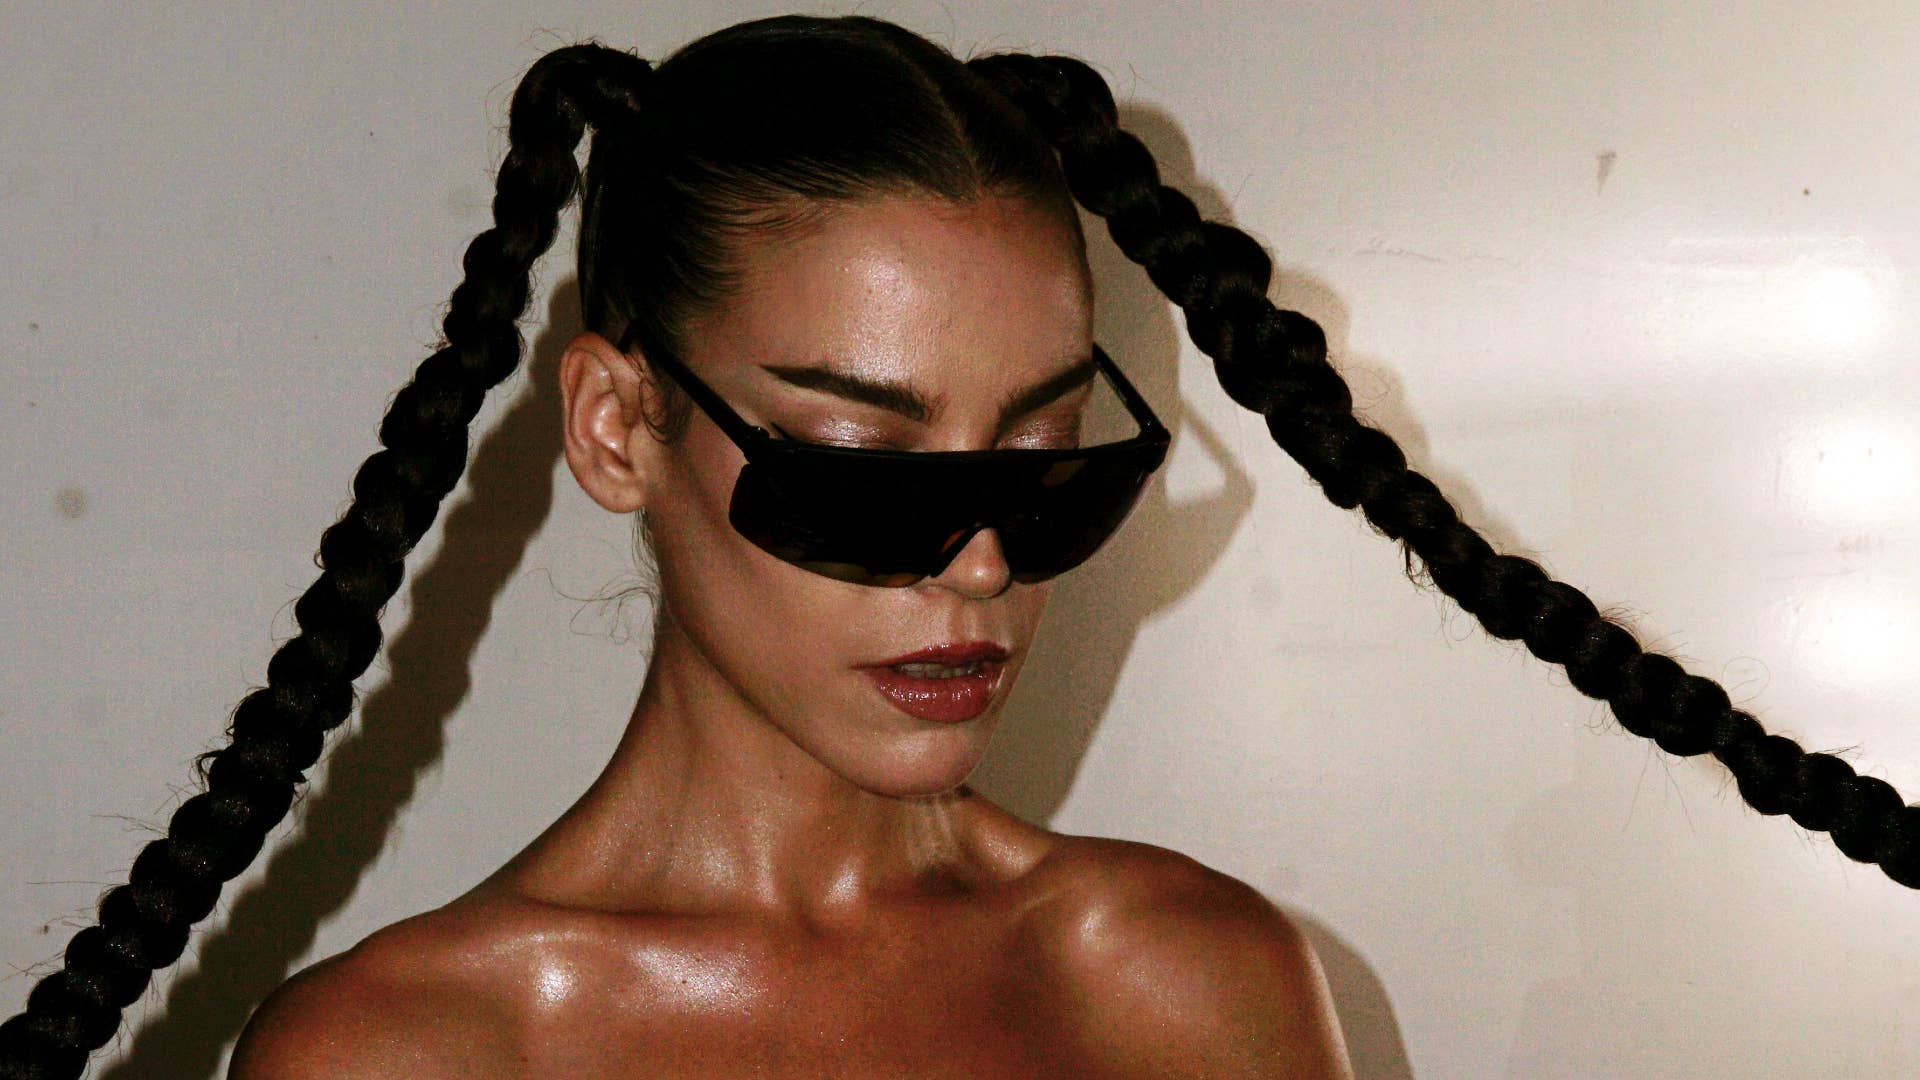 Eva Show wearing thick black sunglasses and two long braids